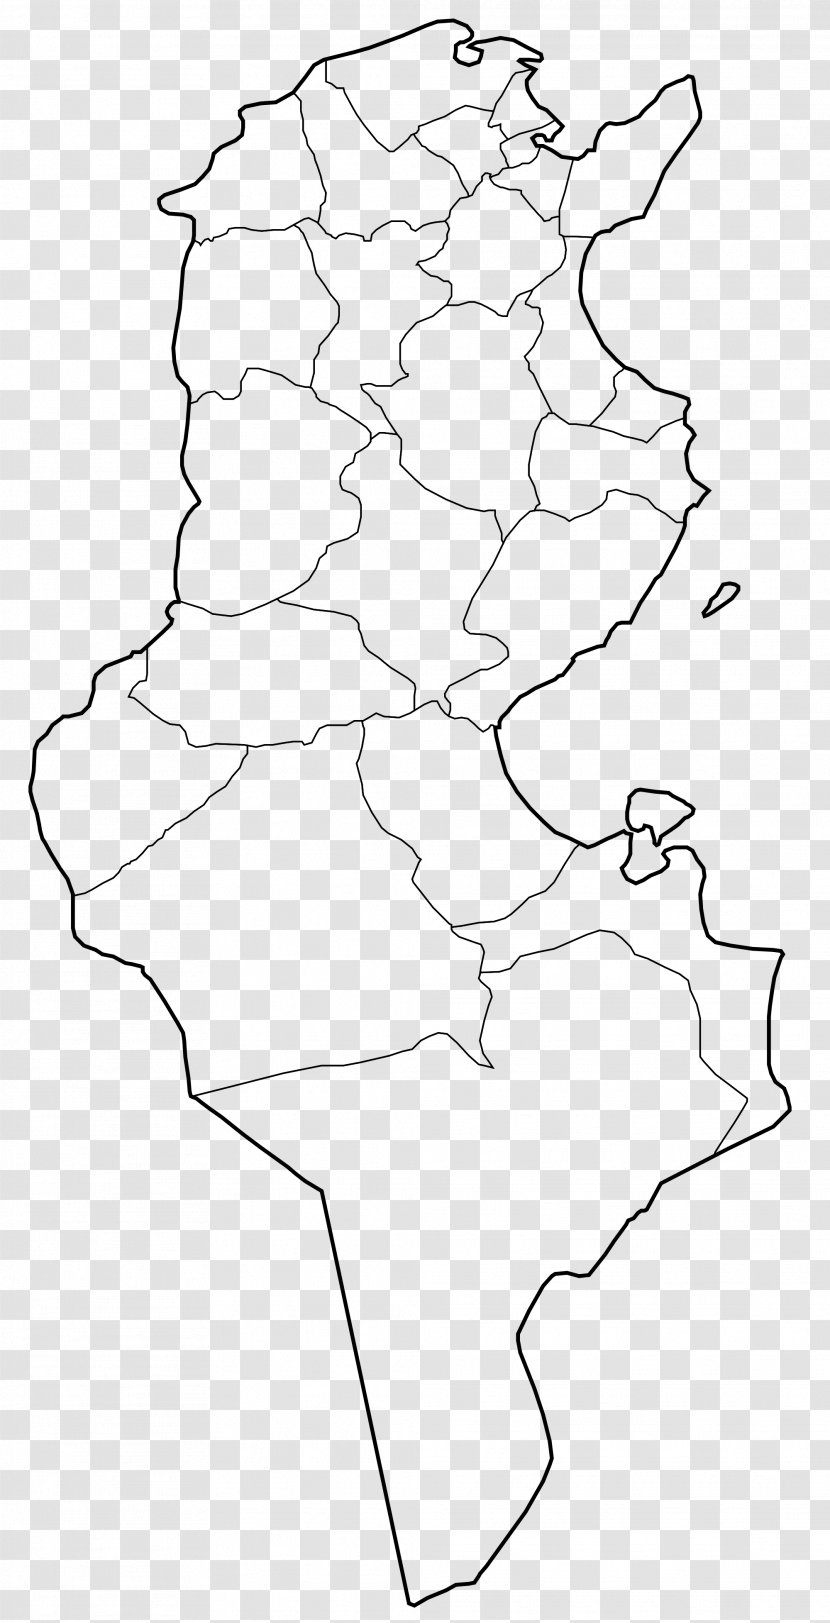 Governorates Of Tunisia Bizerte Governorate Tunis Wilayah Vector Map - Drawing Transparent PNG